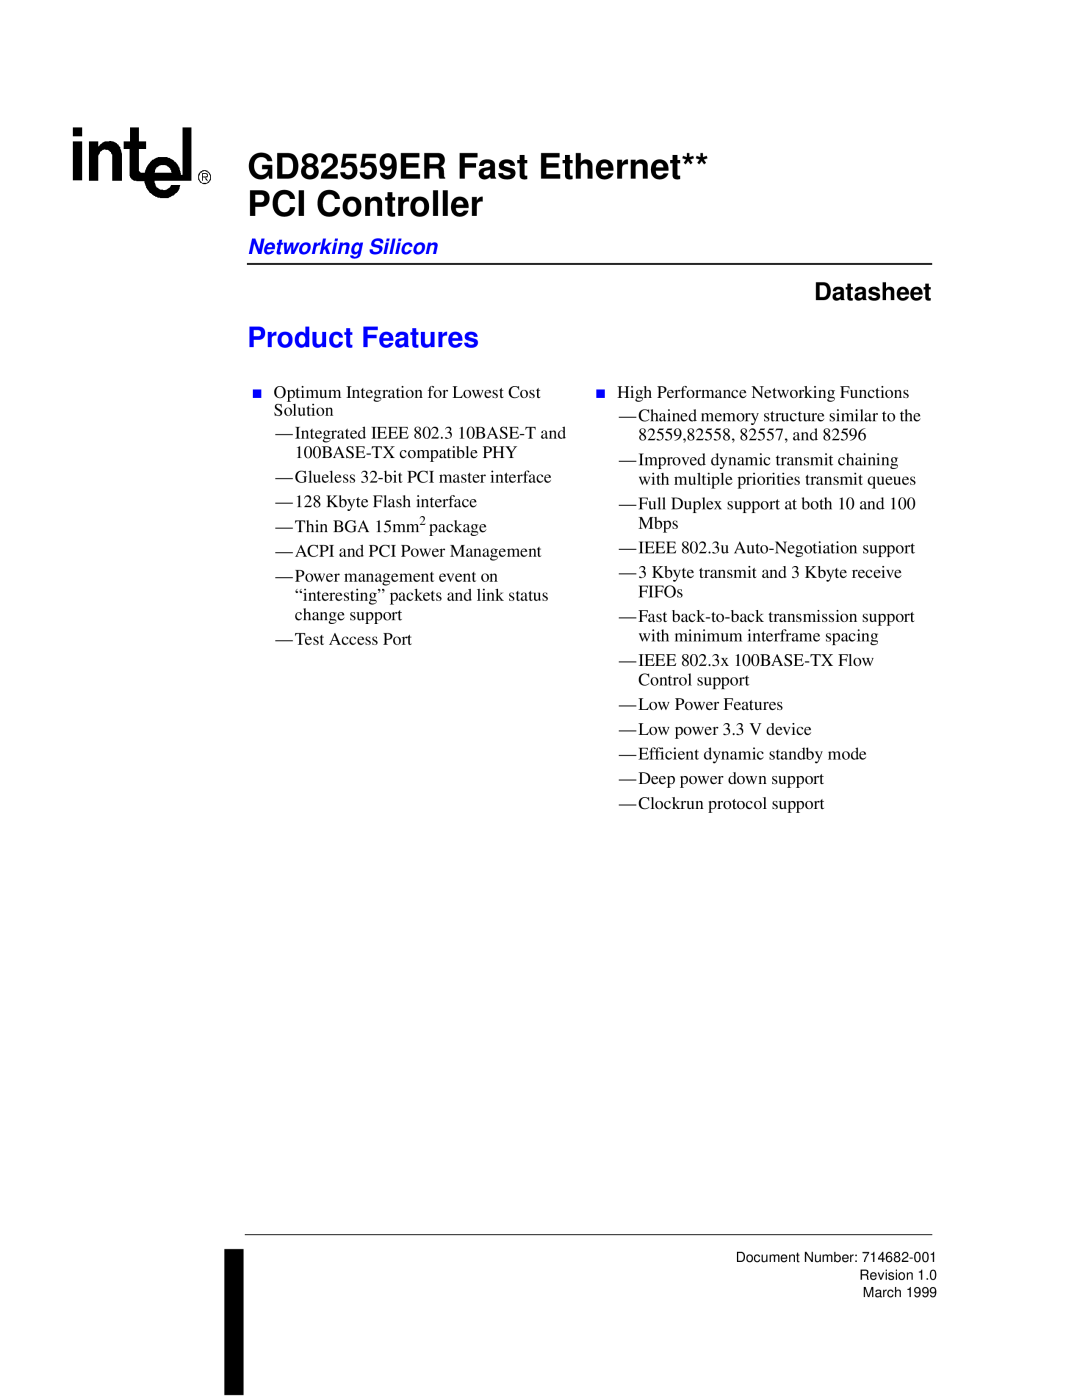 Intel manual Product Features, GD82559ER Fast Ethernet PCI Controller, Datasheet, Networking Silicon 